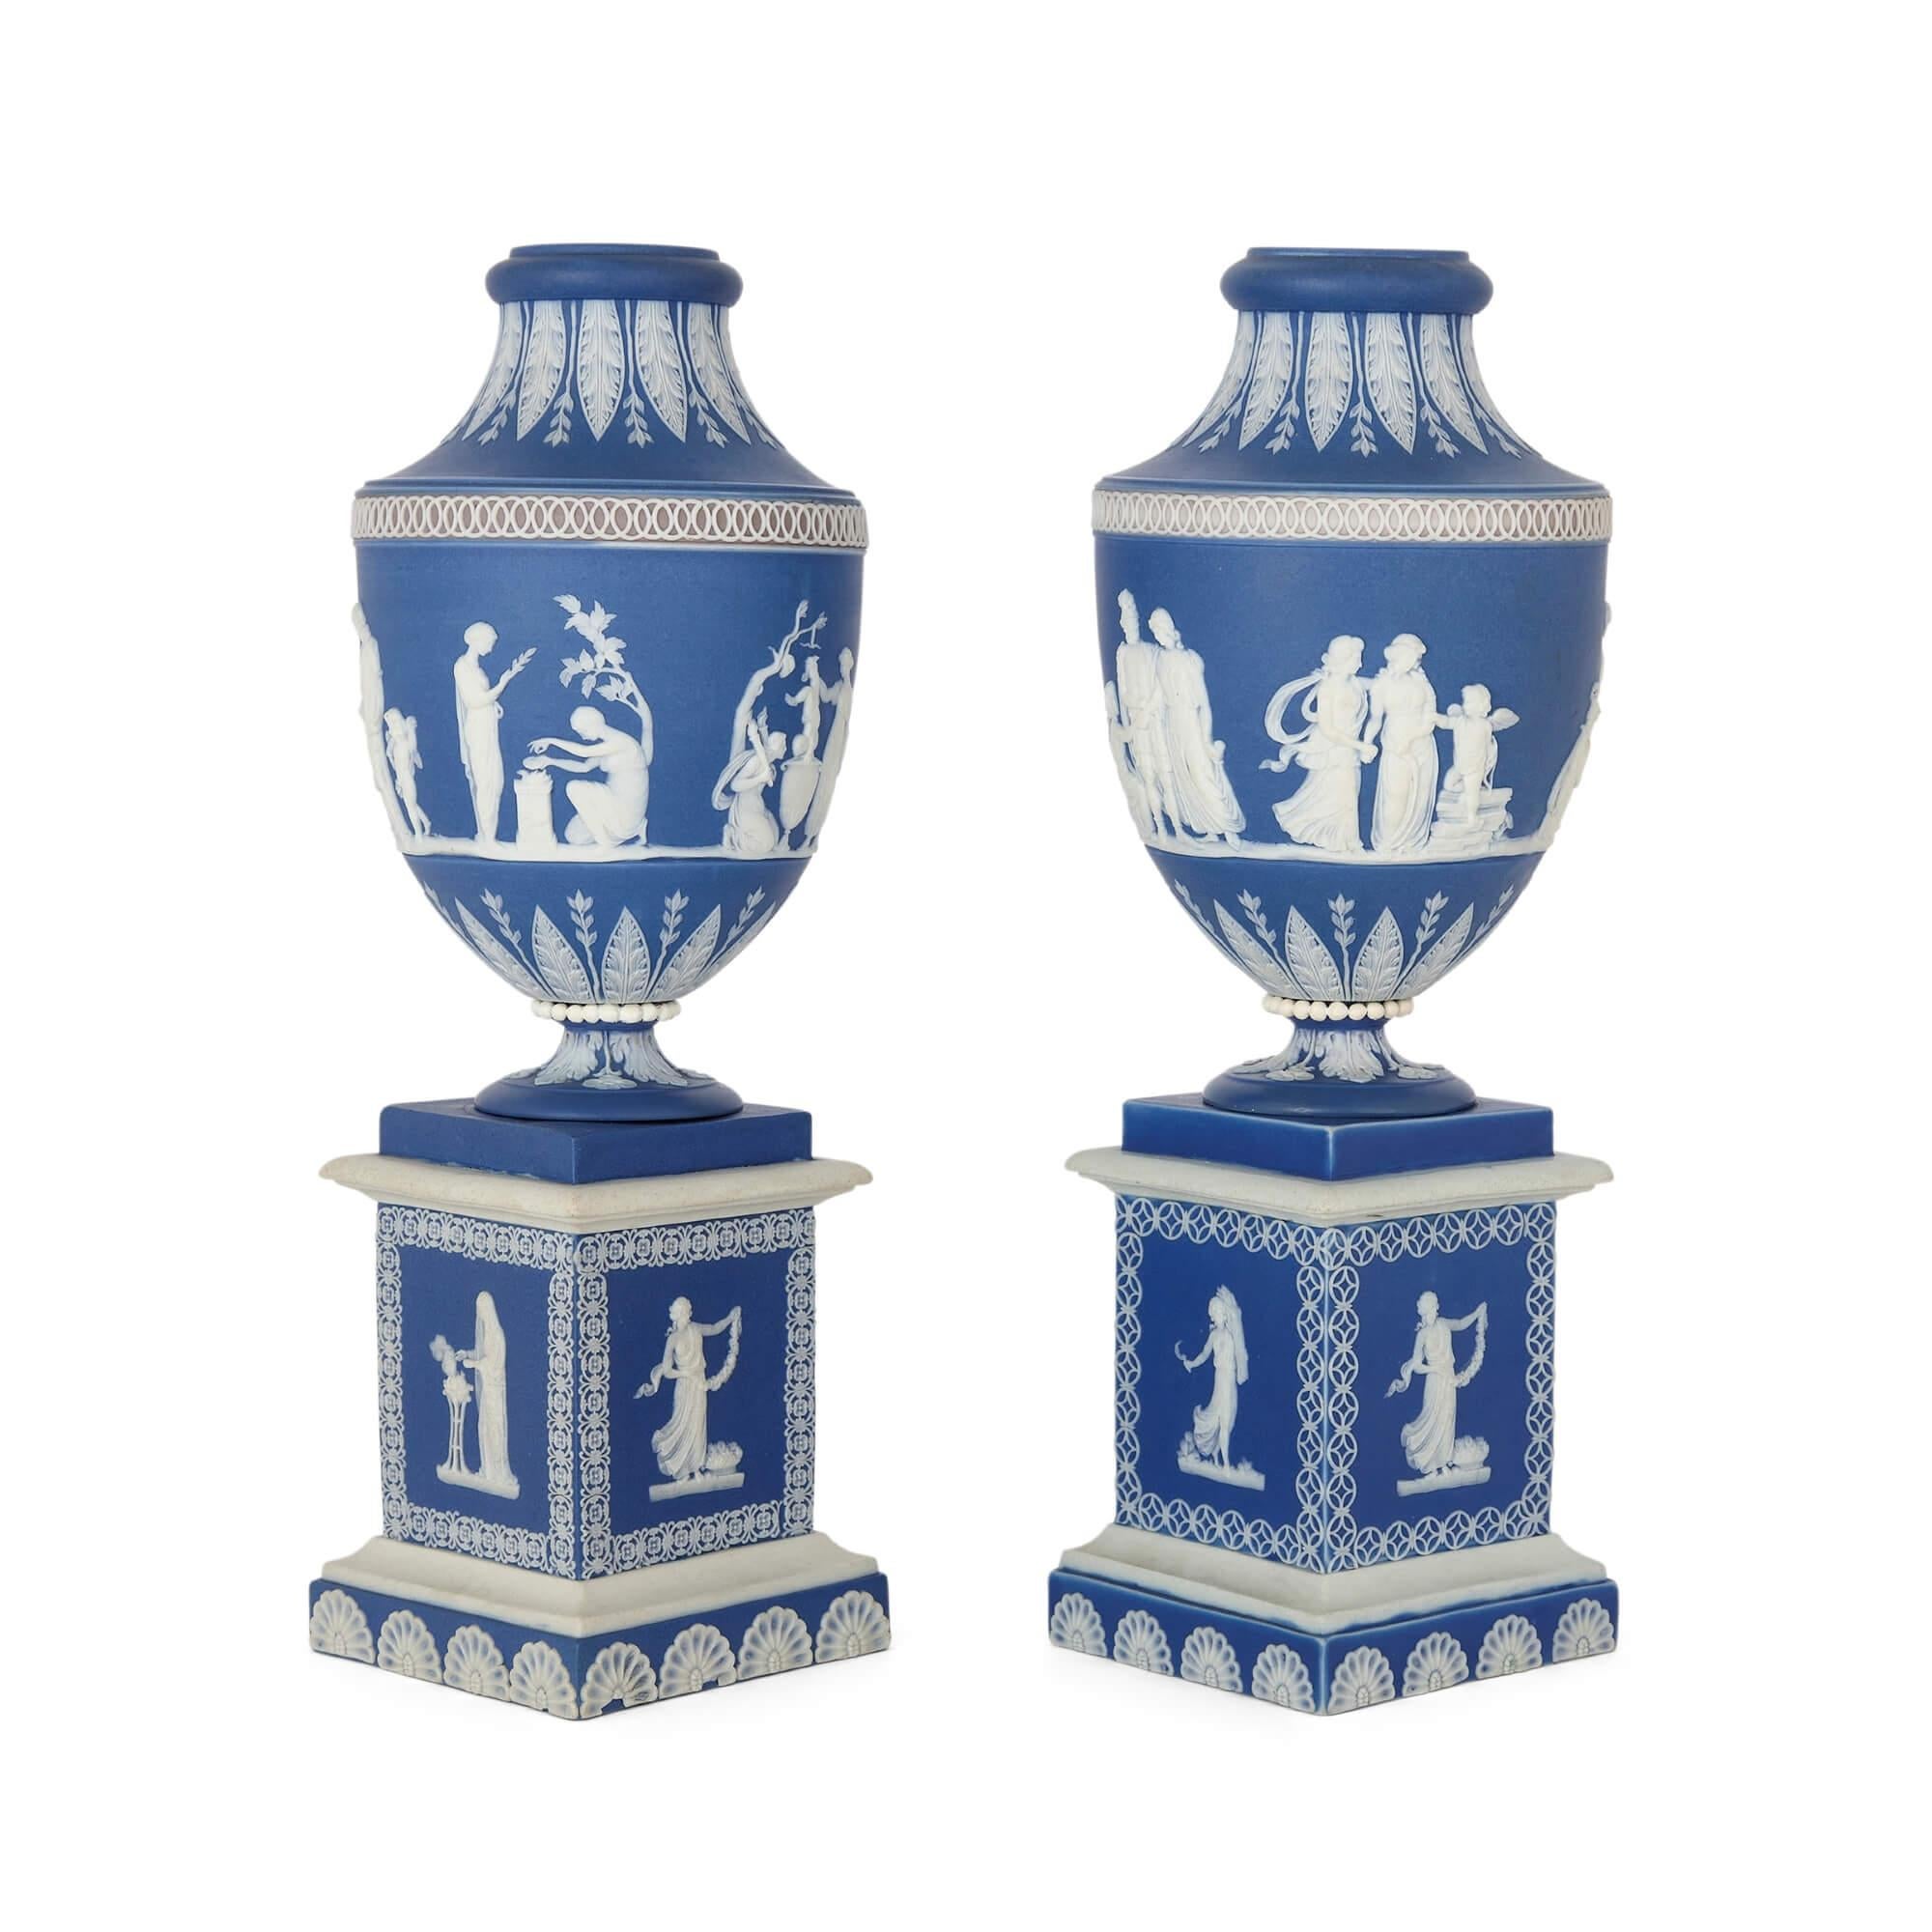 Pair of antique jasperware vases by Adams Pottery, circa 1780
English, c. 1780
Height 27cm, diameter 10cm

This remarkable pair of neoclassical blue jasperware vases stands as a testament to the sublime artistry and finesse of William Adams, an